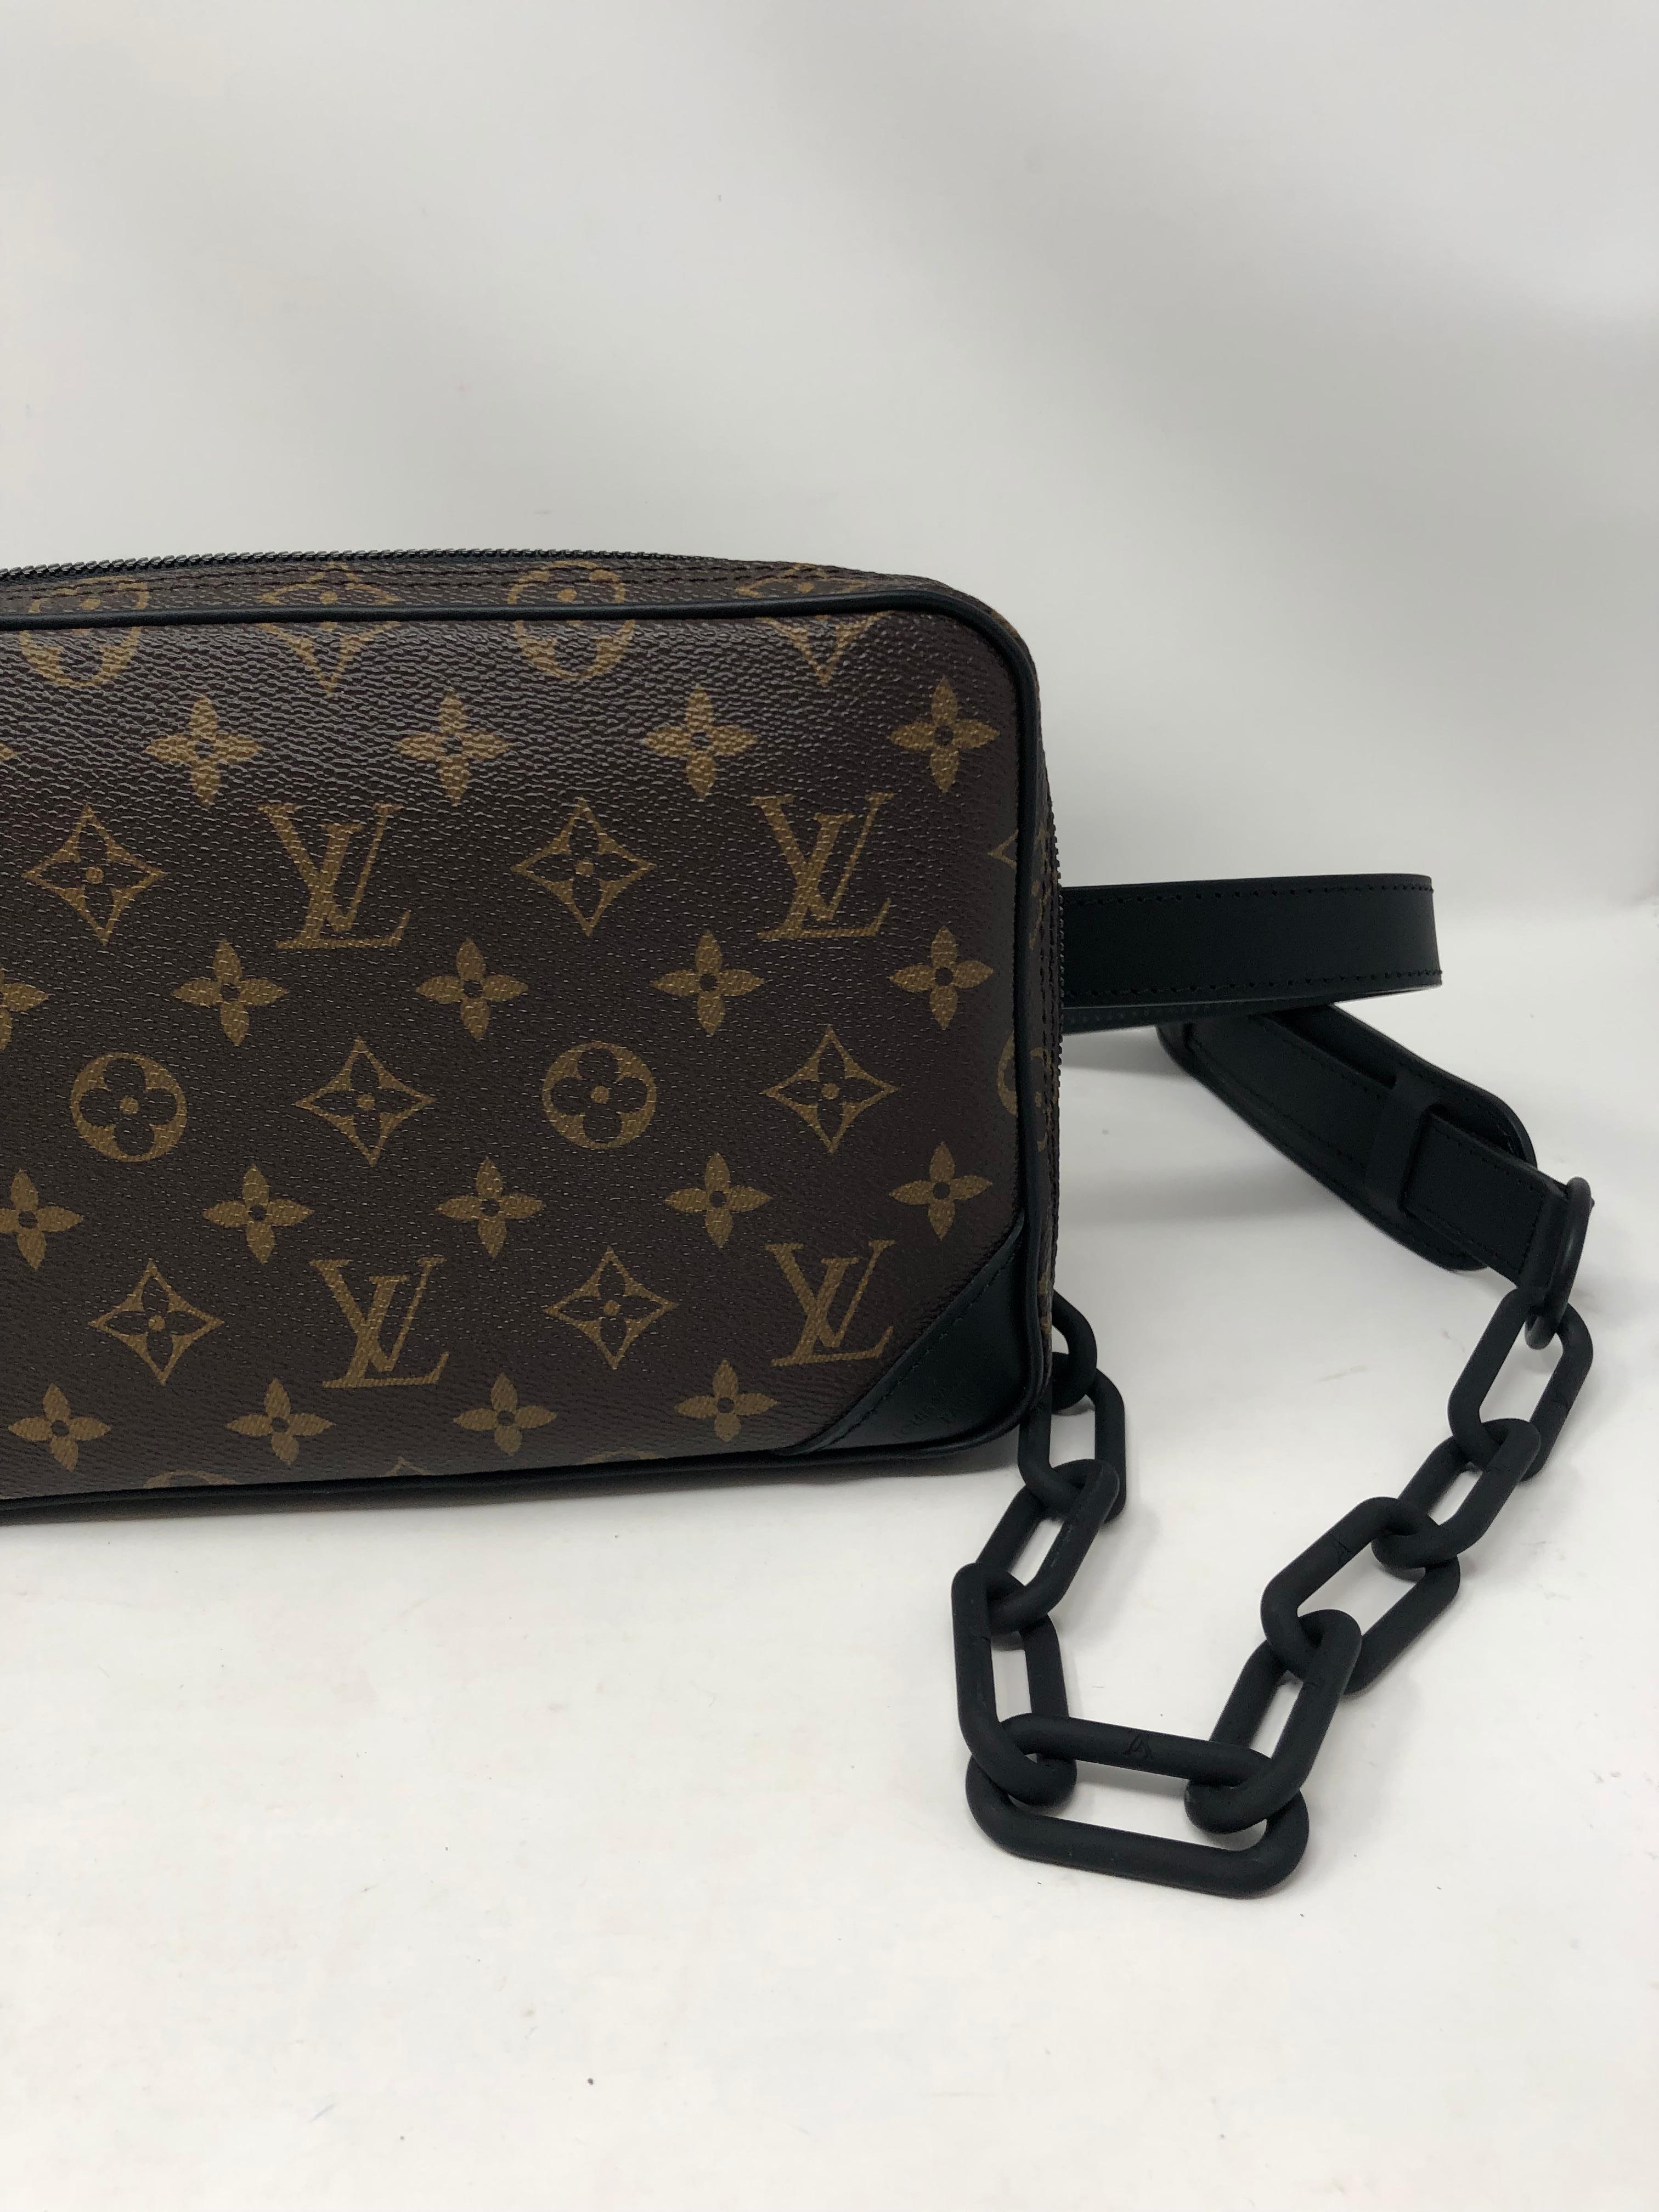 Louis Vuitton Monogram Utility Front Bag by Virgil Abloh. Crossbody Bag and or used as belt bag designed by Off-White founder Virgil Abloh. From his first collection as Creative director. Combining street style and classic monogram from the house